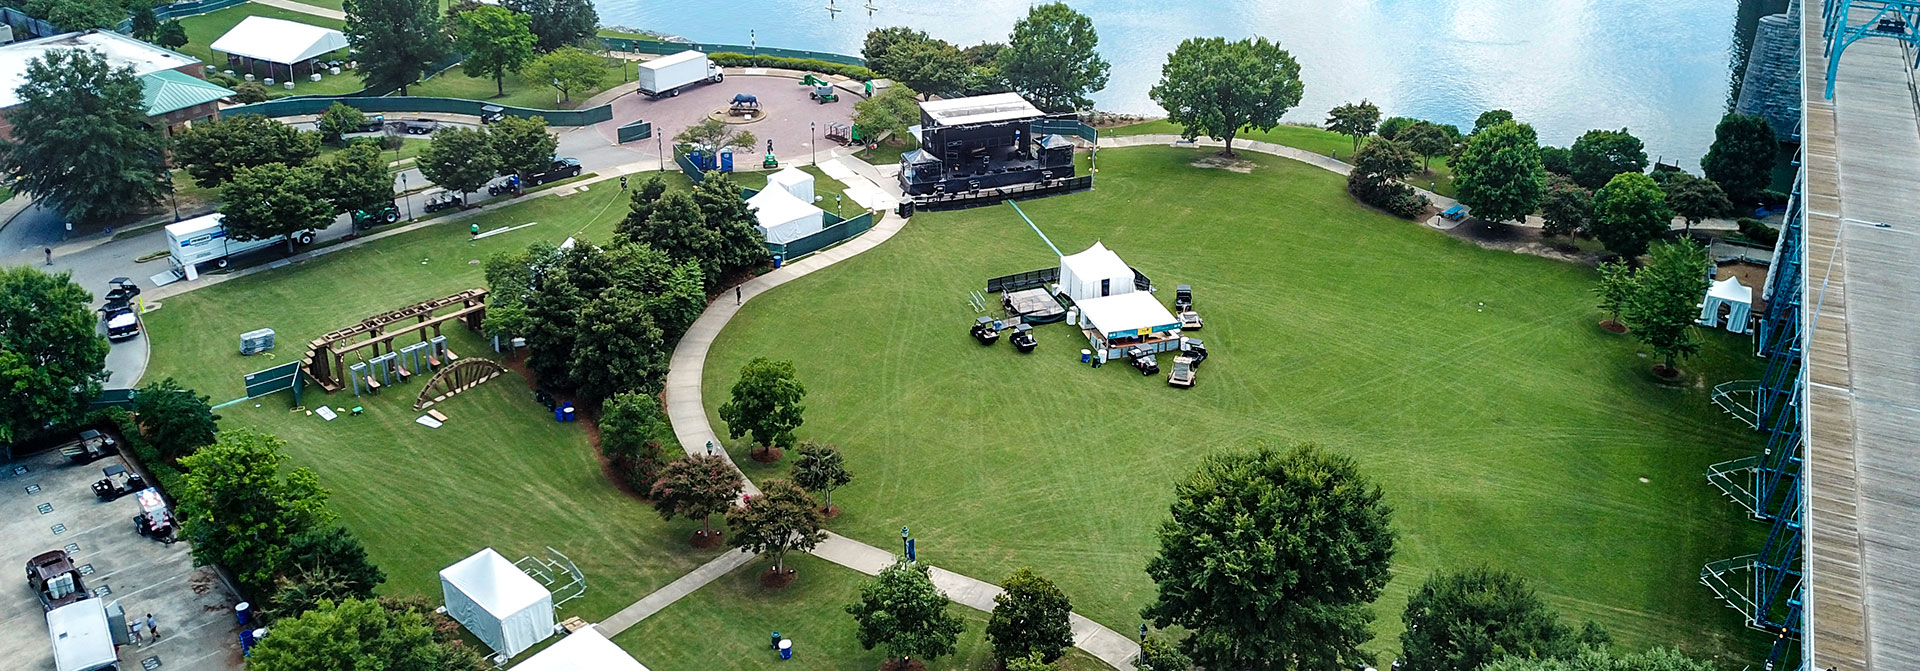 Aerial view of tent event